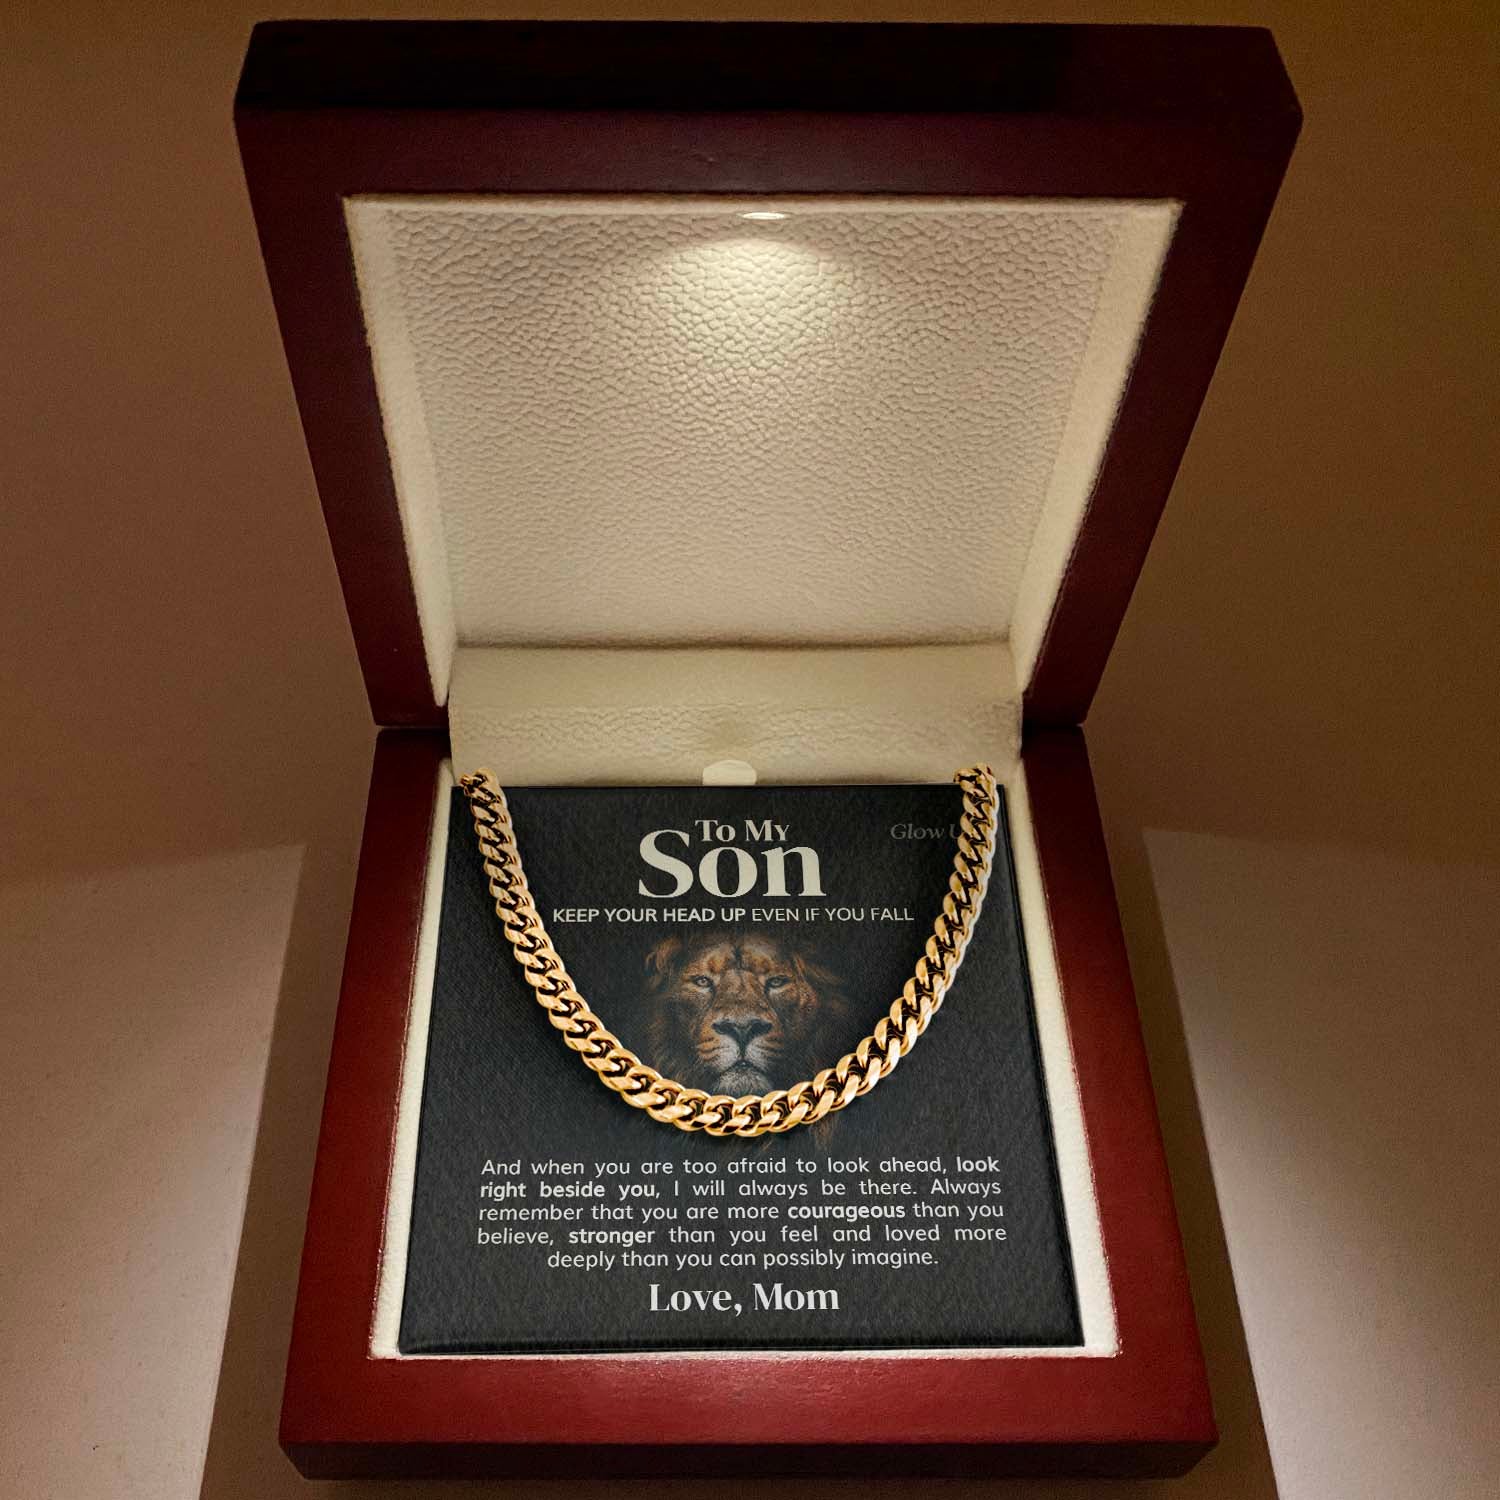 GlowUp 18k Gold Finish / Luxury LED Box To my Son from Mom - Keep your head up - Cuban Link Chain